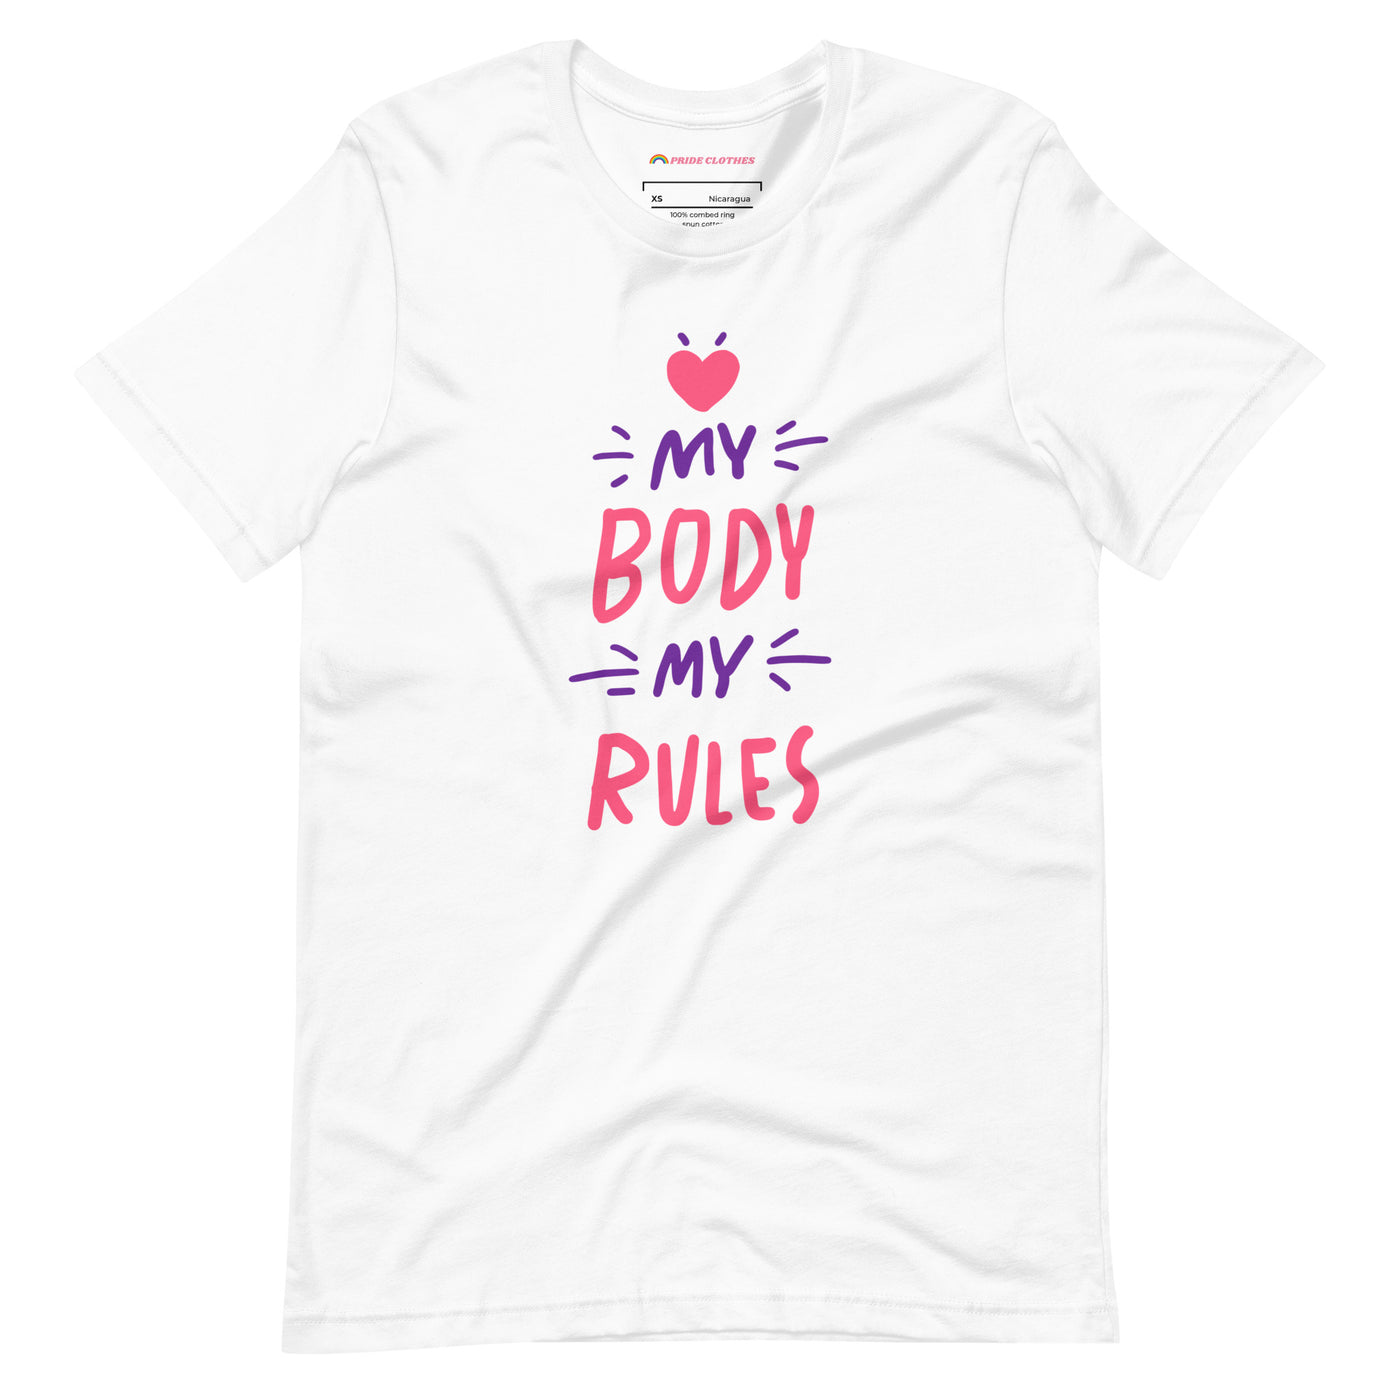 Pride Clothes - My Body My Rules T-Shirt - White